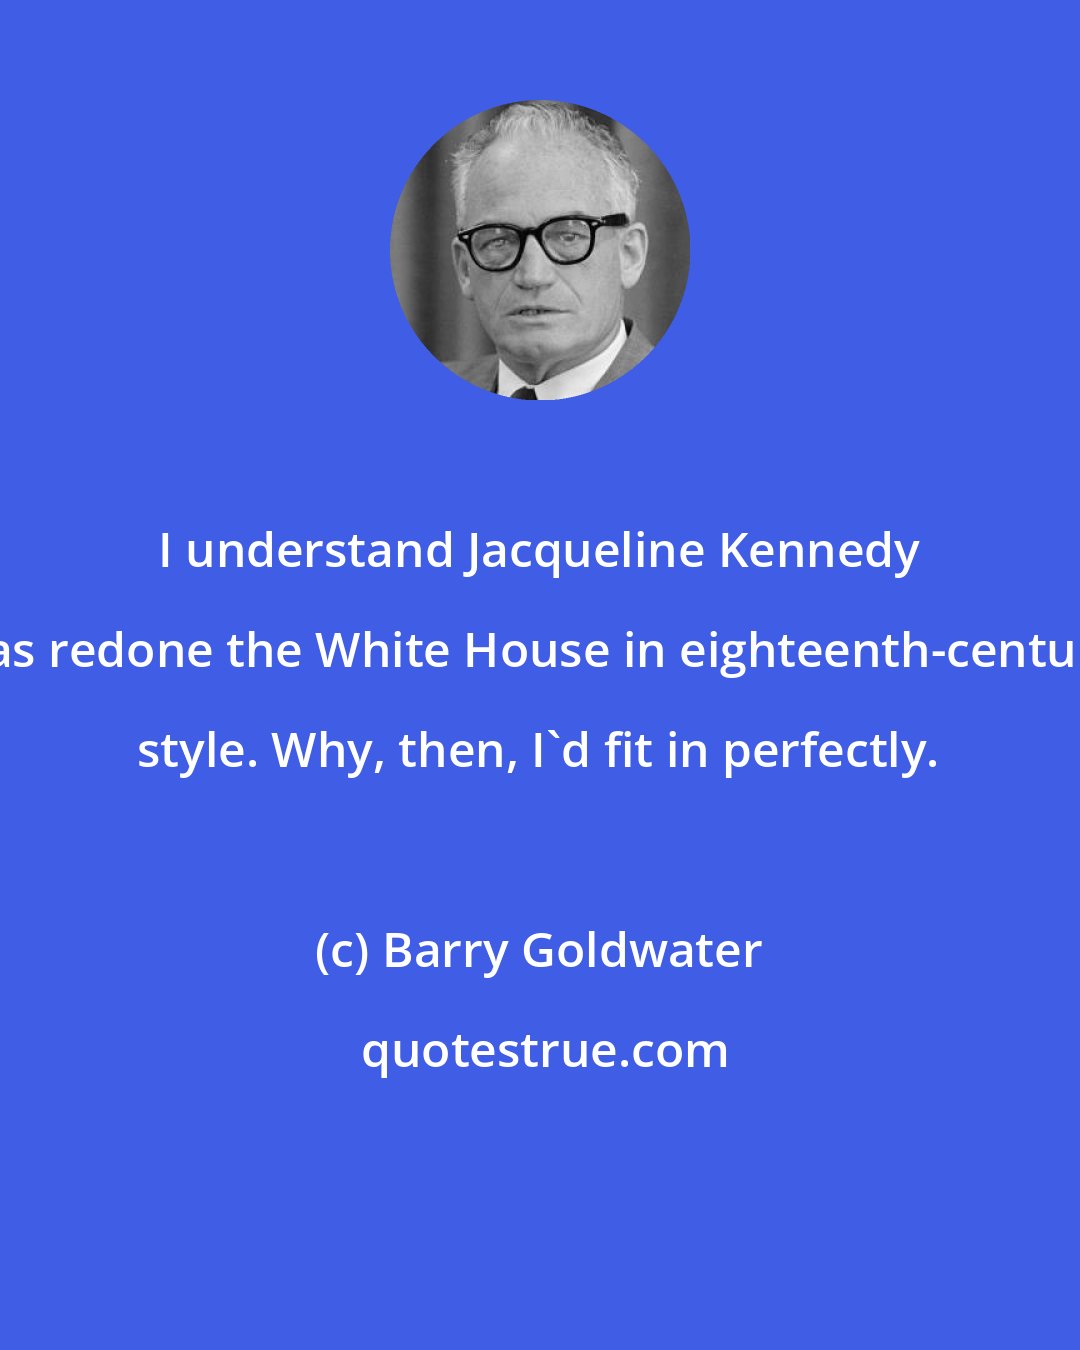 Barry Goldwater: I understand Jacqueline Kennedy has redone the White House in eighteenth-century style. Why, then, I'd fit in perfectly.